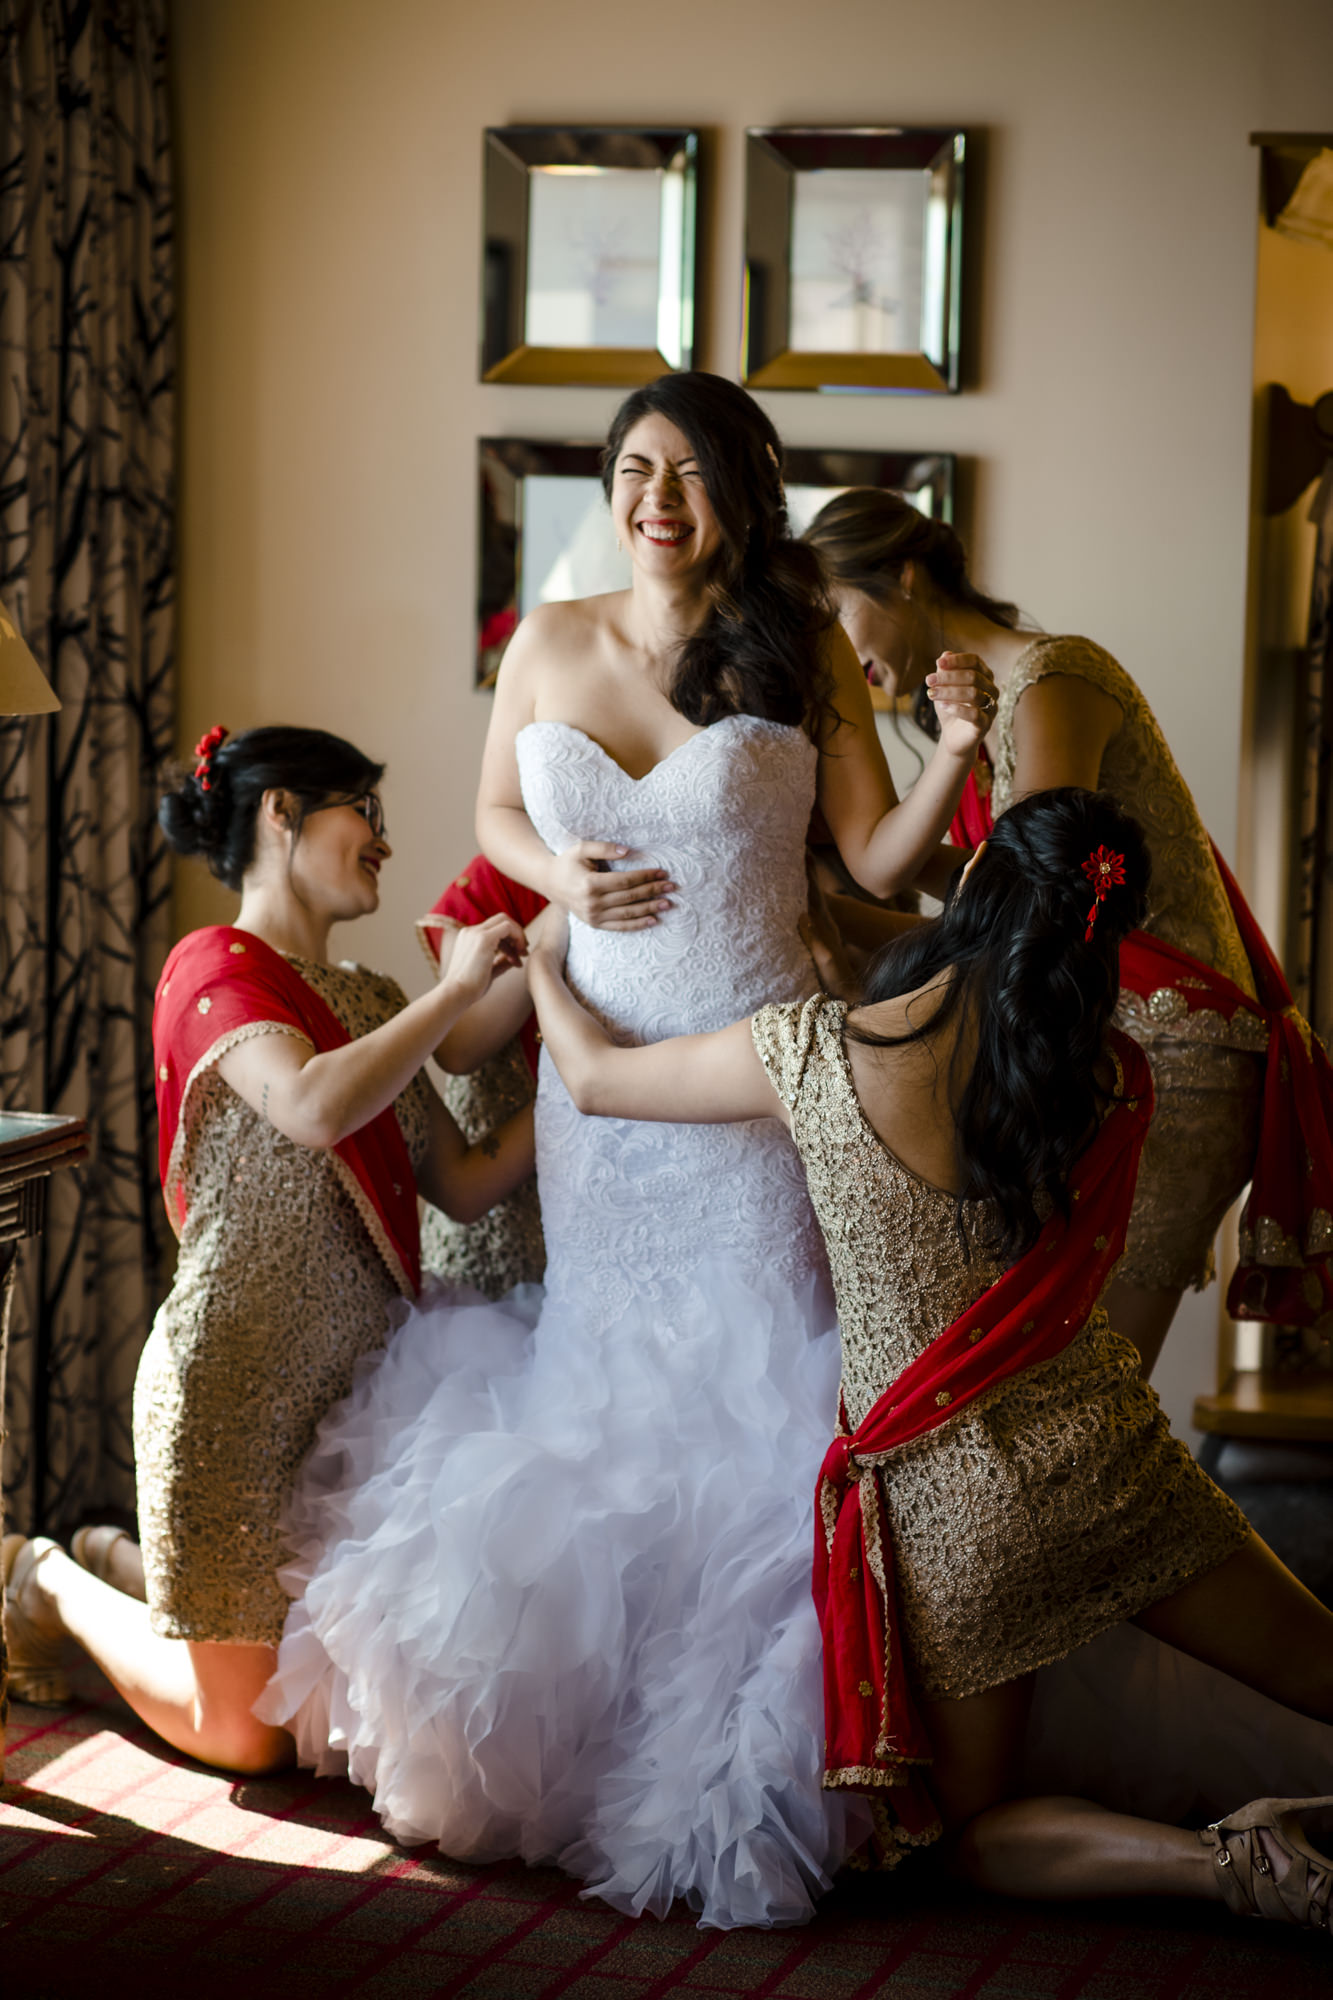 Bridesmaids helping Kelly into her wedding gown. Photo by Jenn Tai, Seattle wedding photographer.